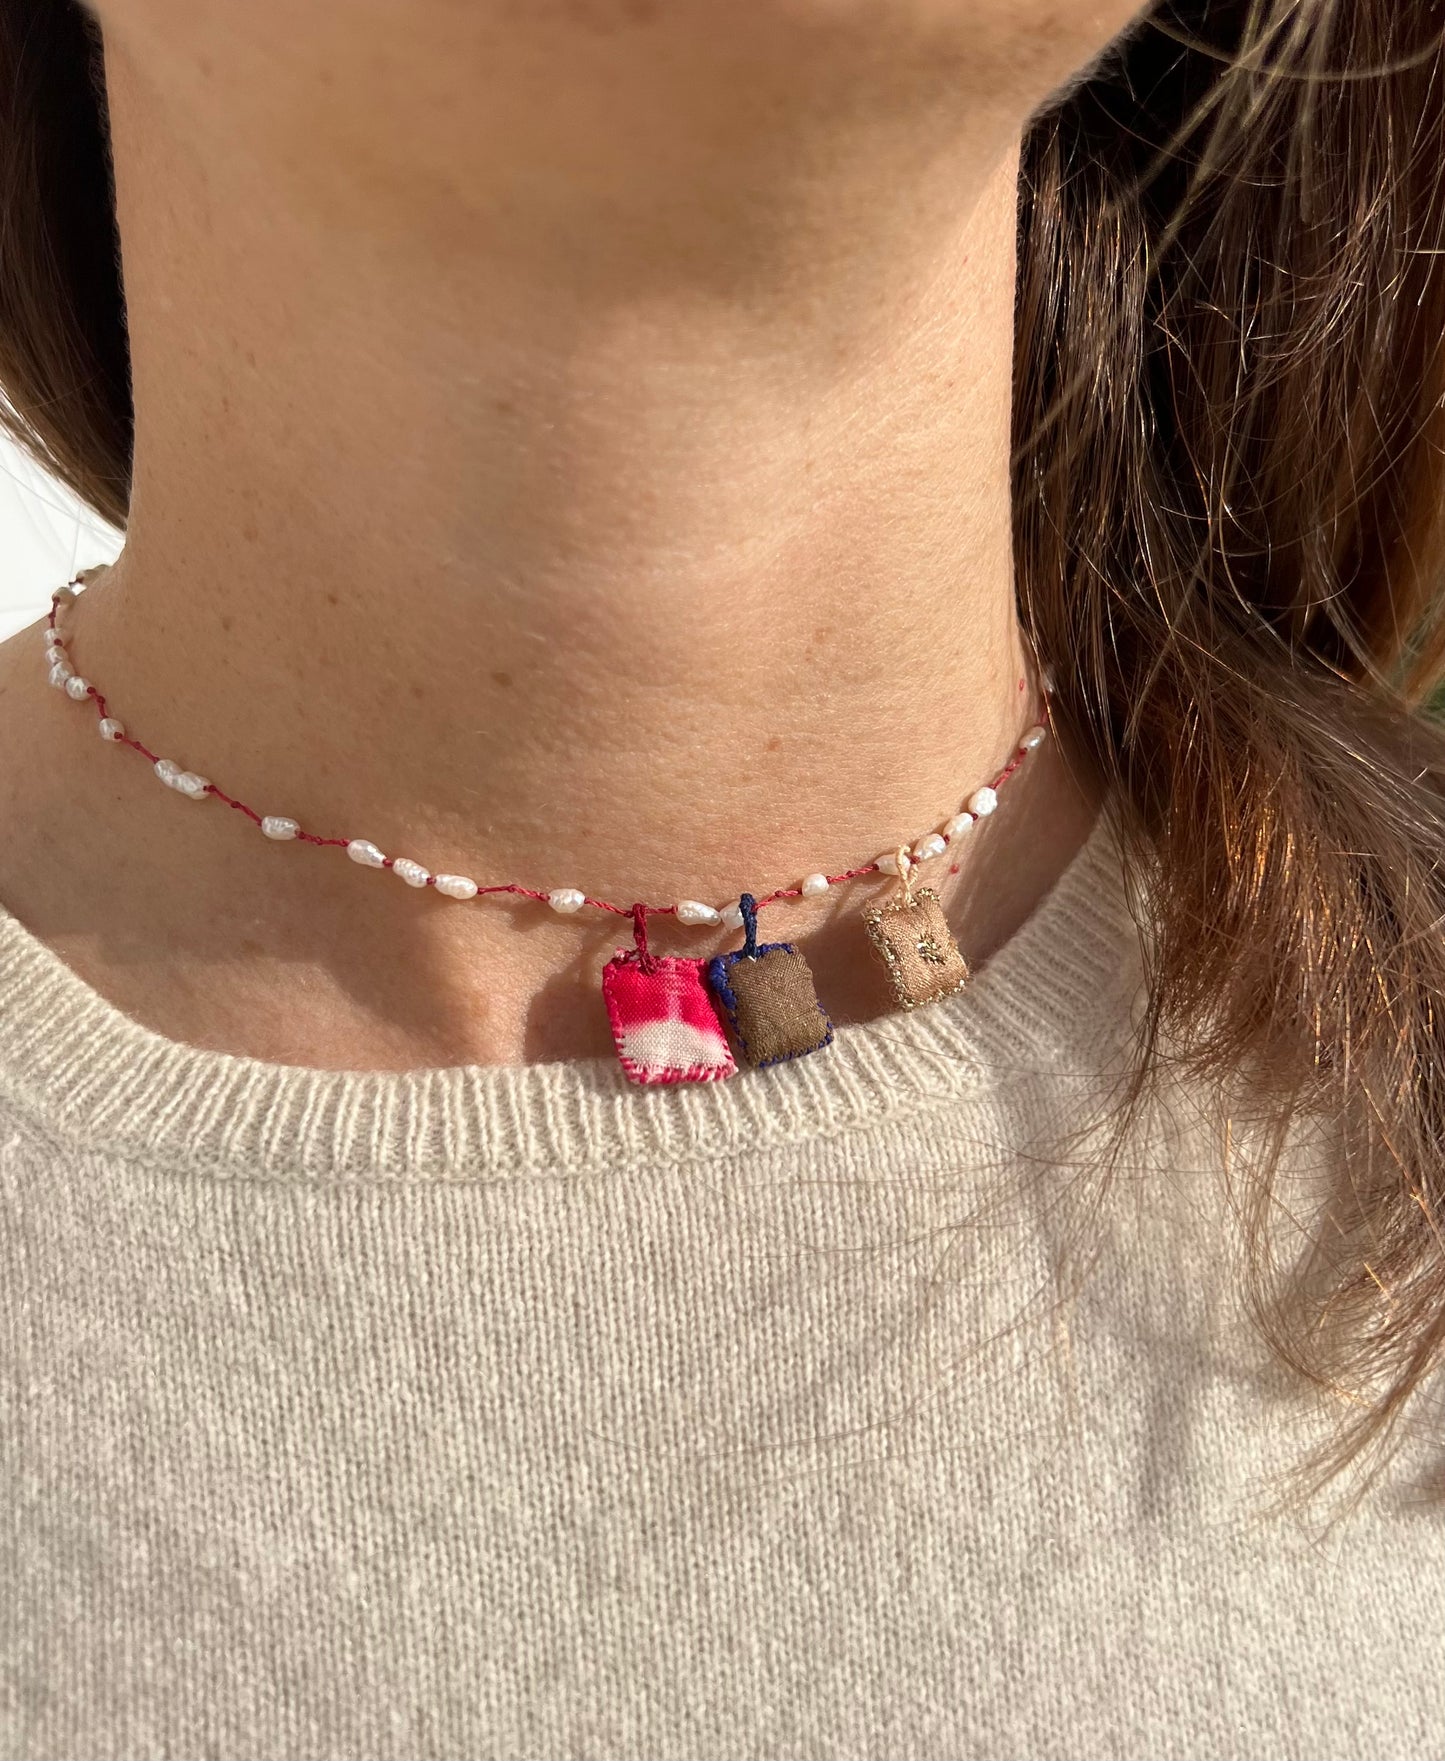 Necklace - ‘Sophia’ Mother Pearl necklace with tie and dye red, brown,  cushions